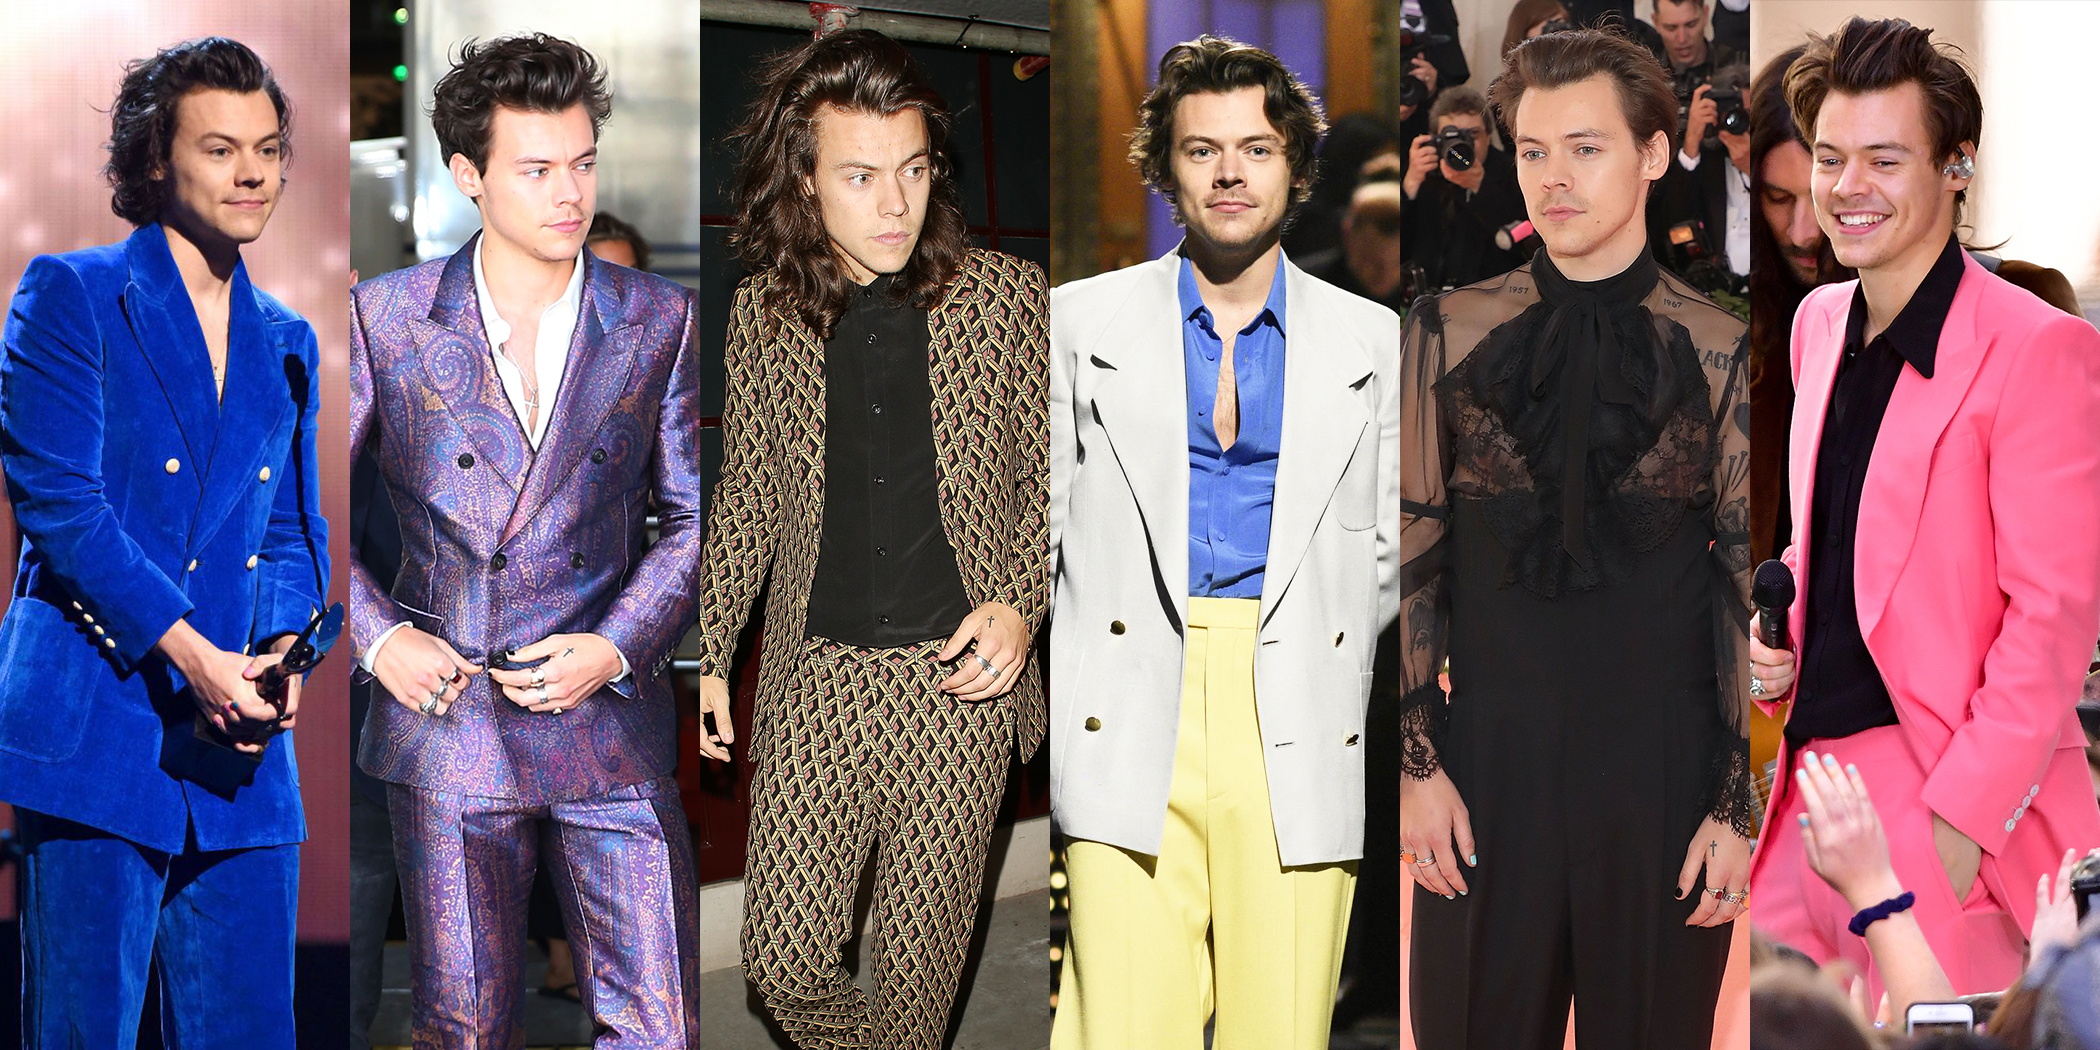 Harry Styles Suits Photos - Harry Styles Tour Outfits